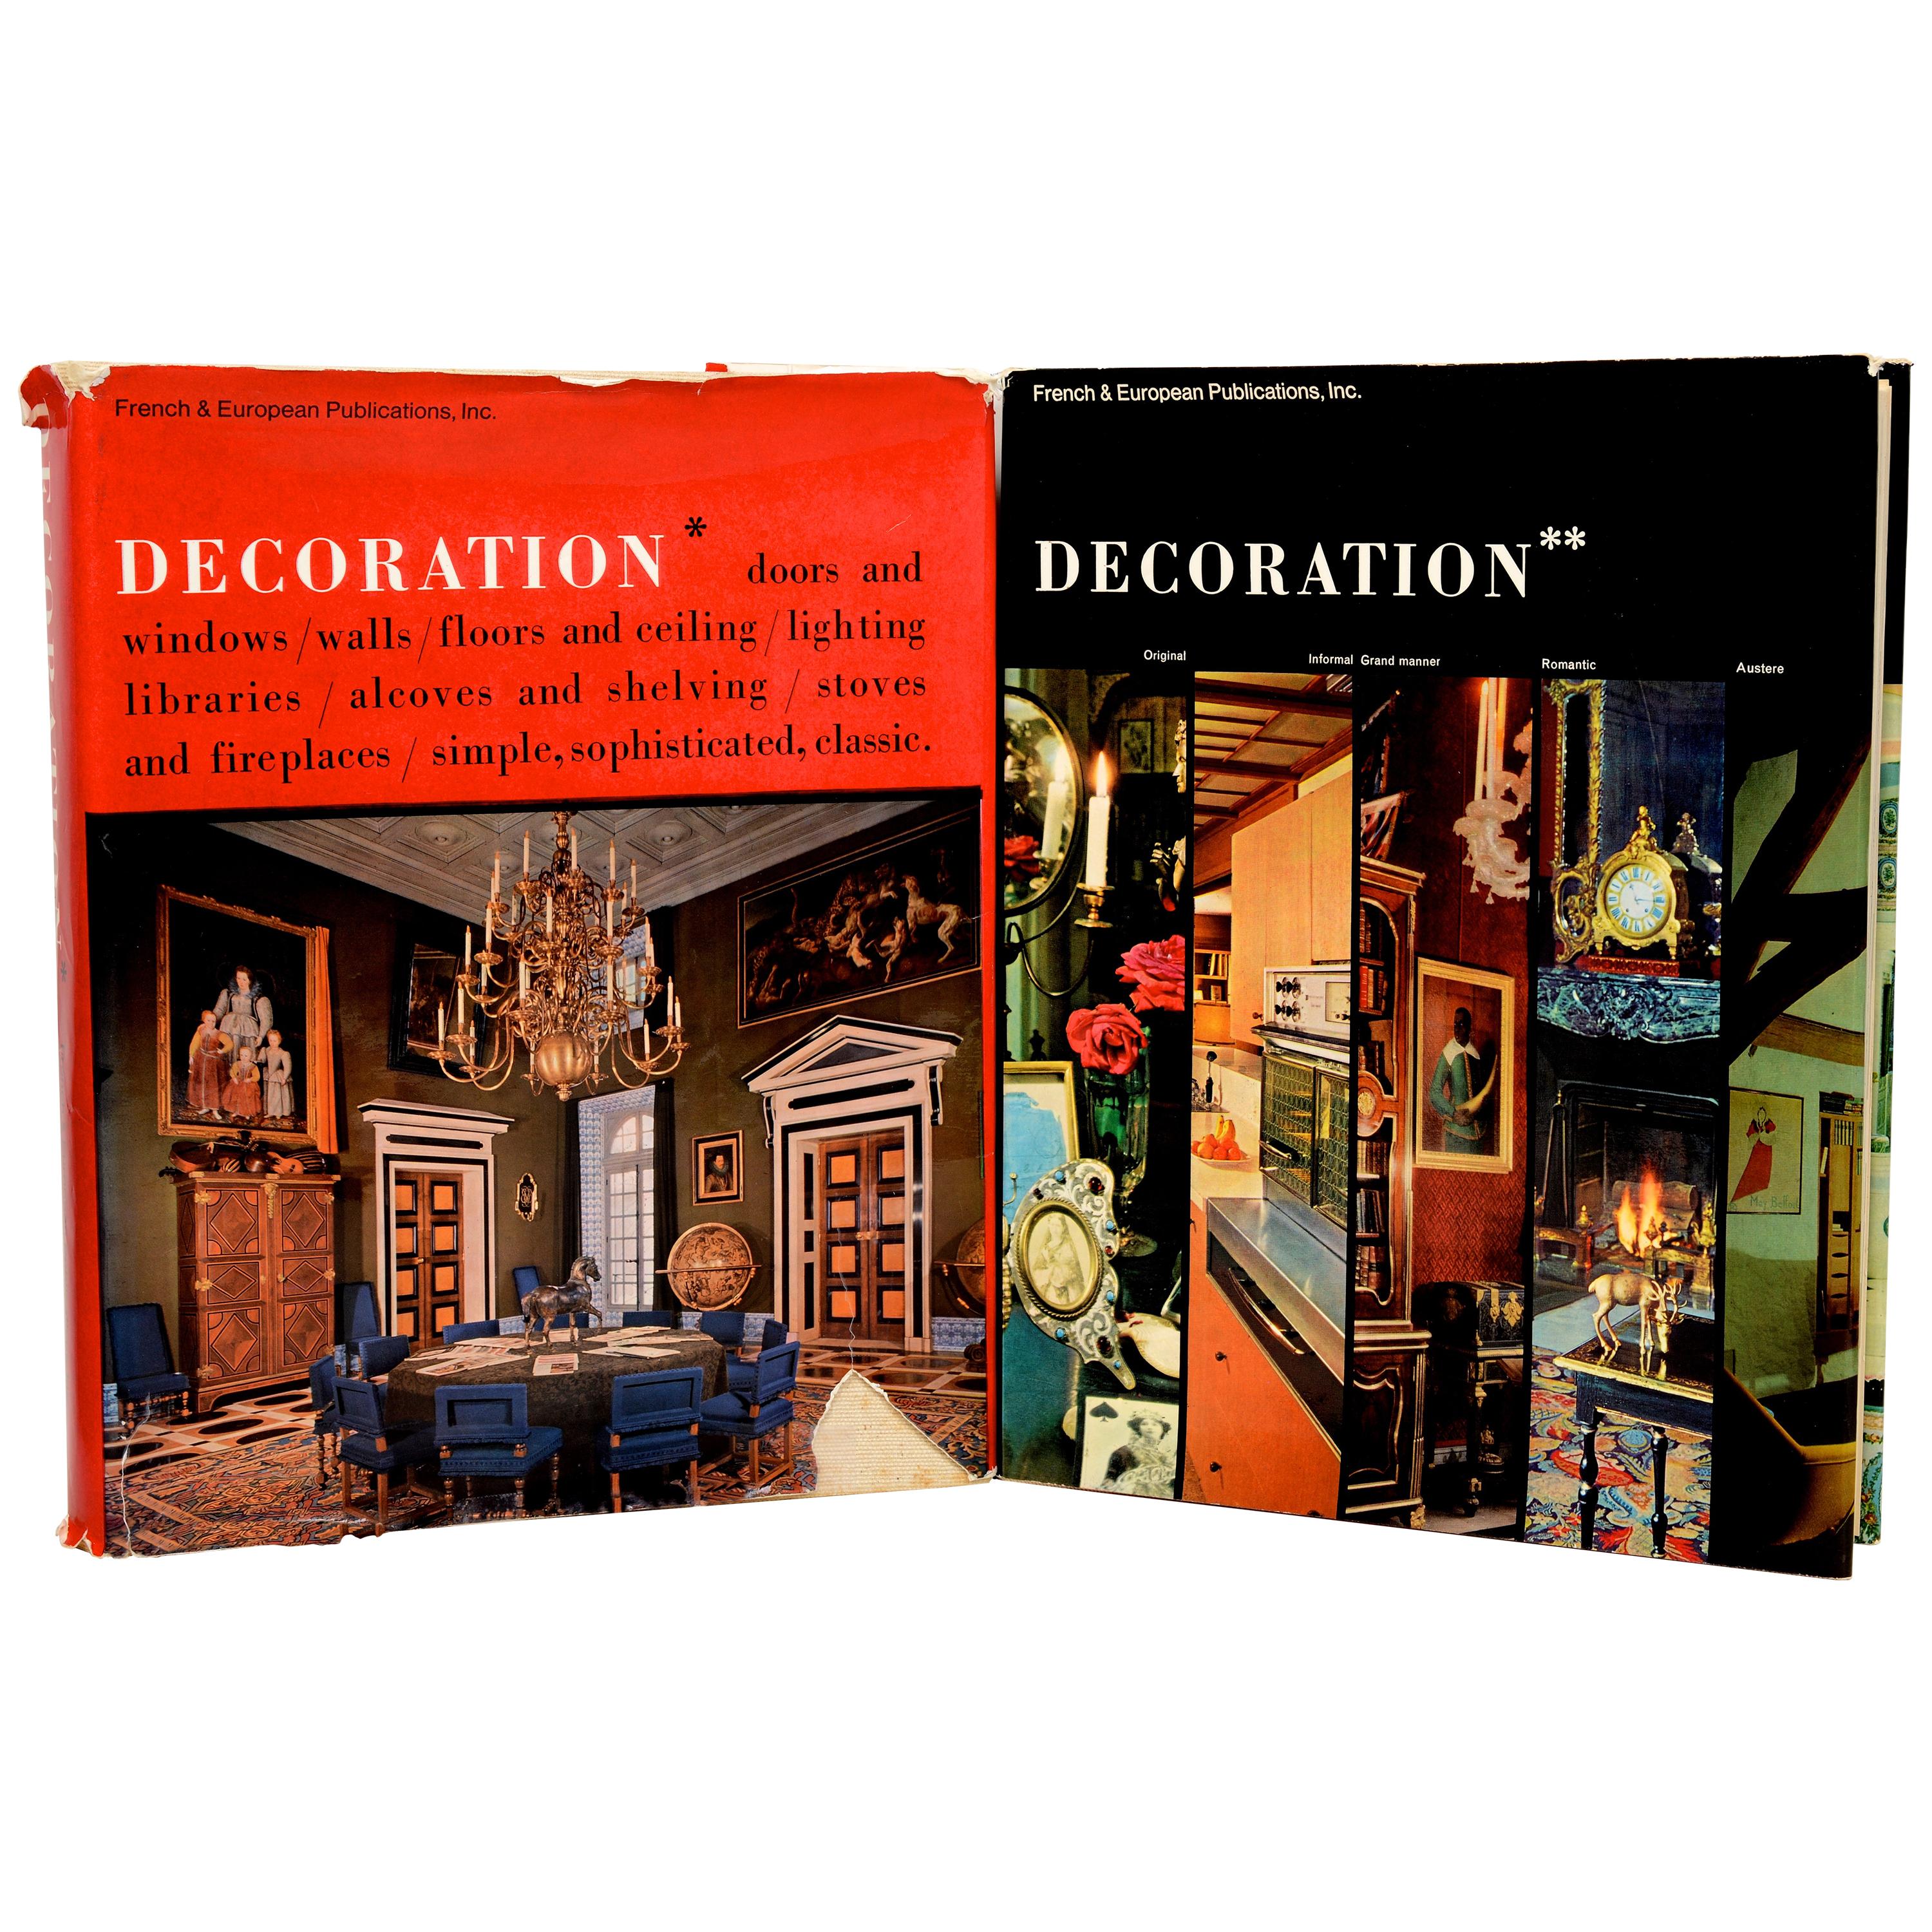 La Decoration by Pierre Levallois, a Two Volume Set in English, First Edition